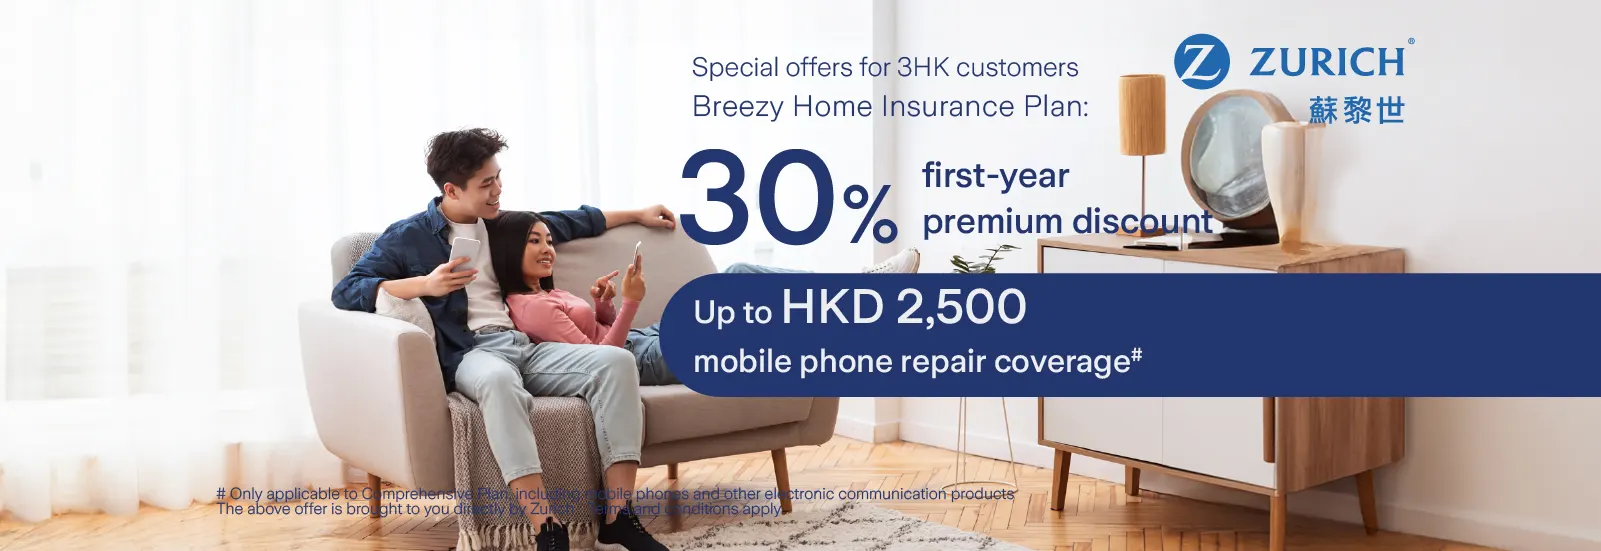 30% first-year discount on Breezy Home Insurance's premium